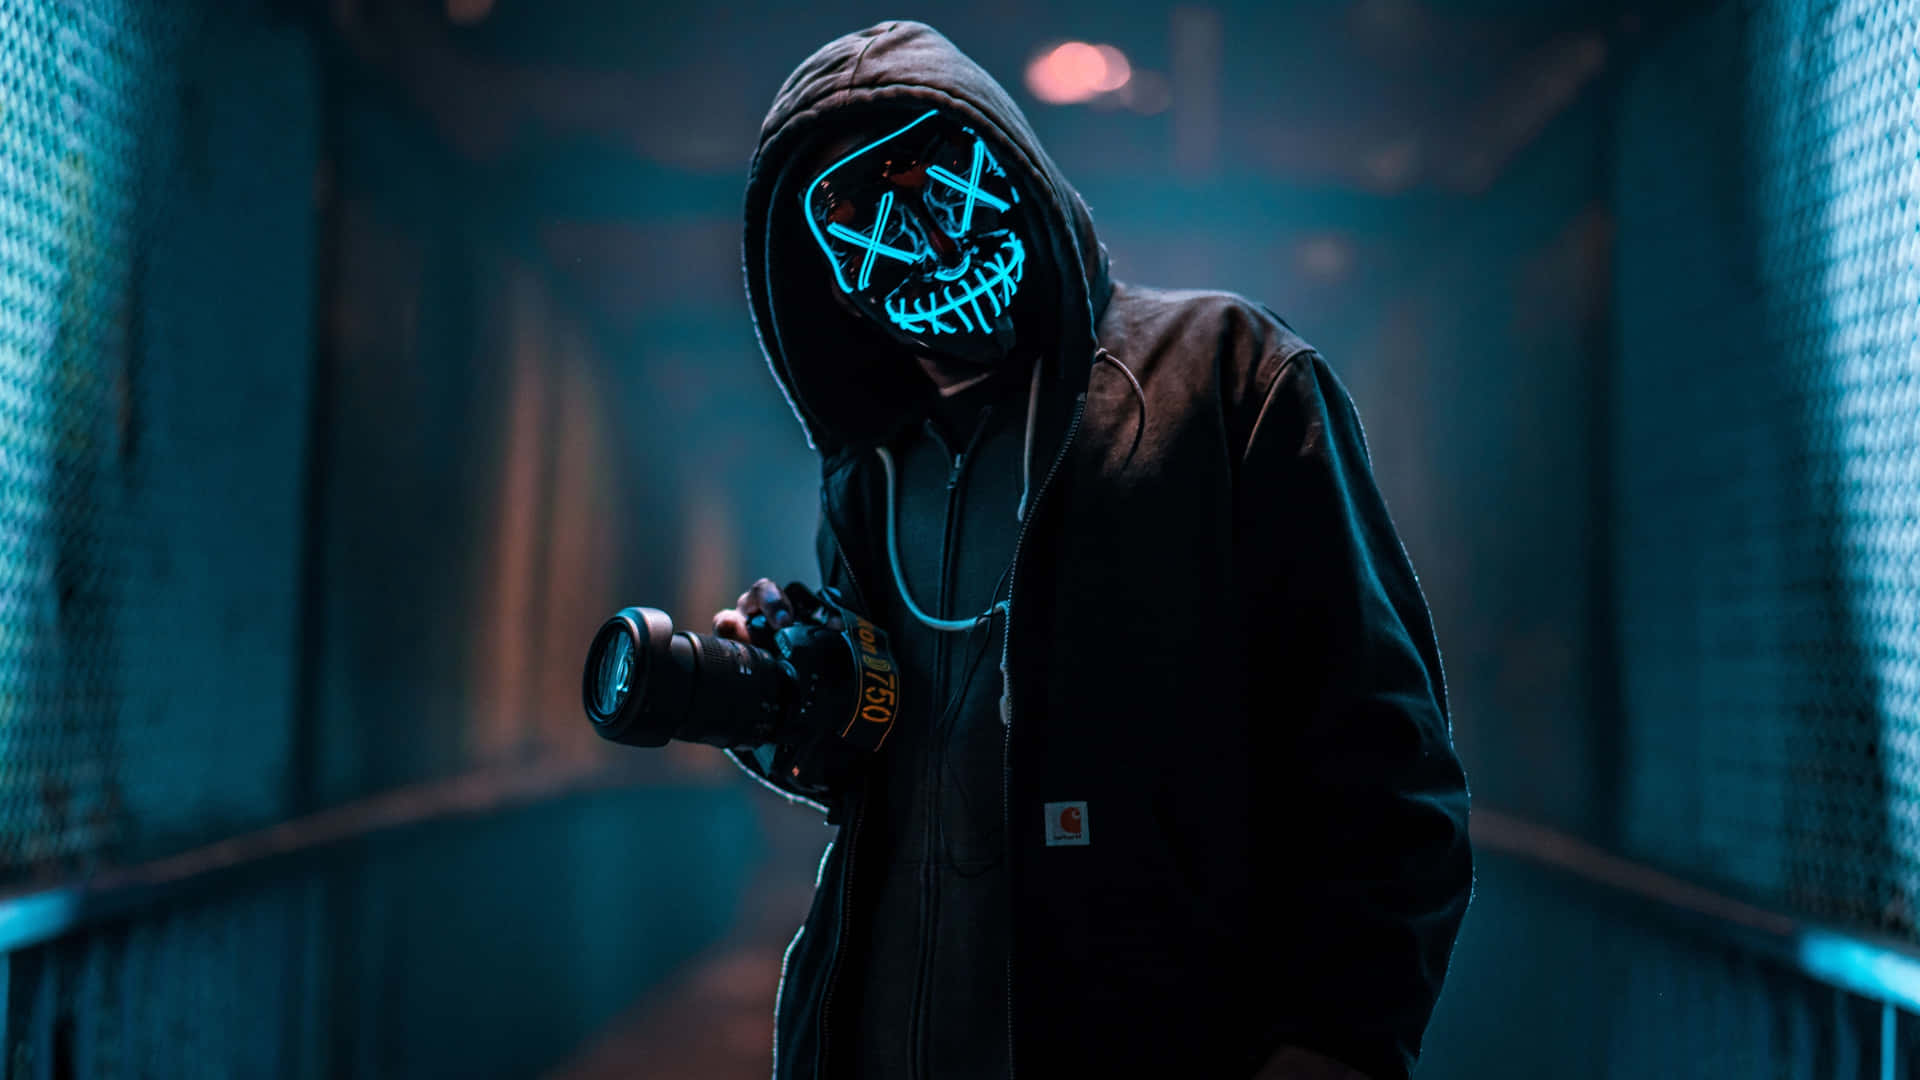 Neon Blue 4k Mask Anonymous Photographer Background